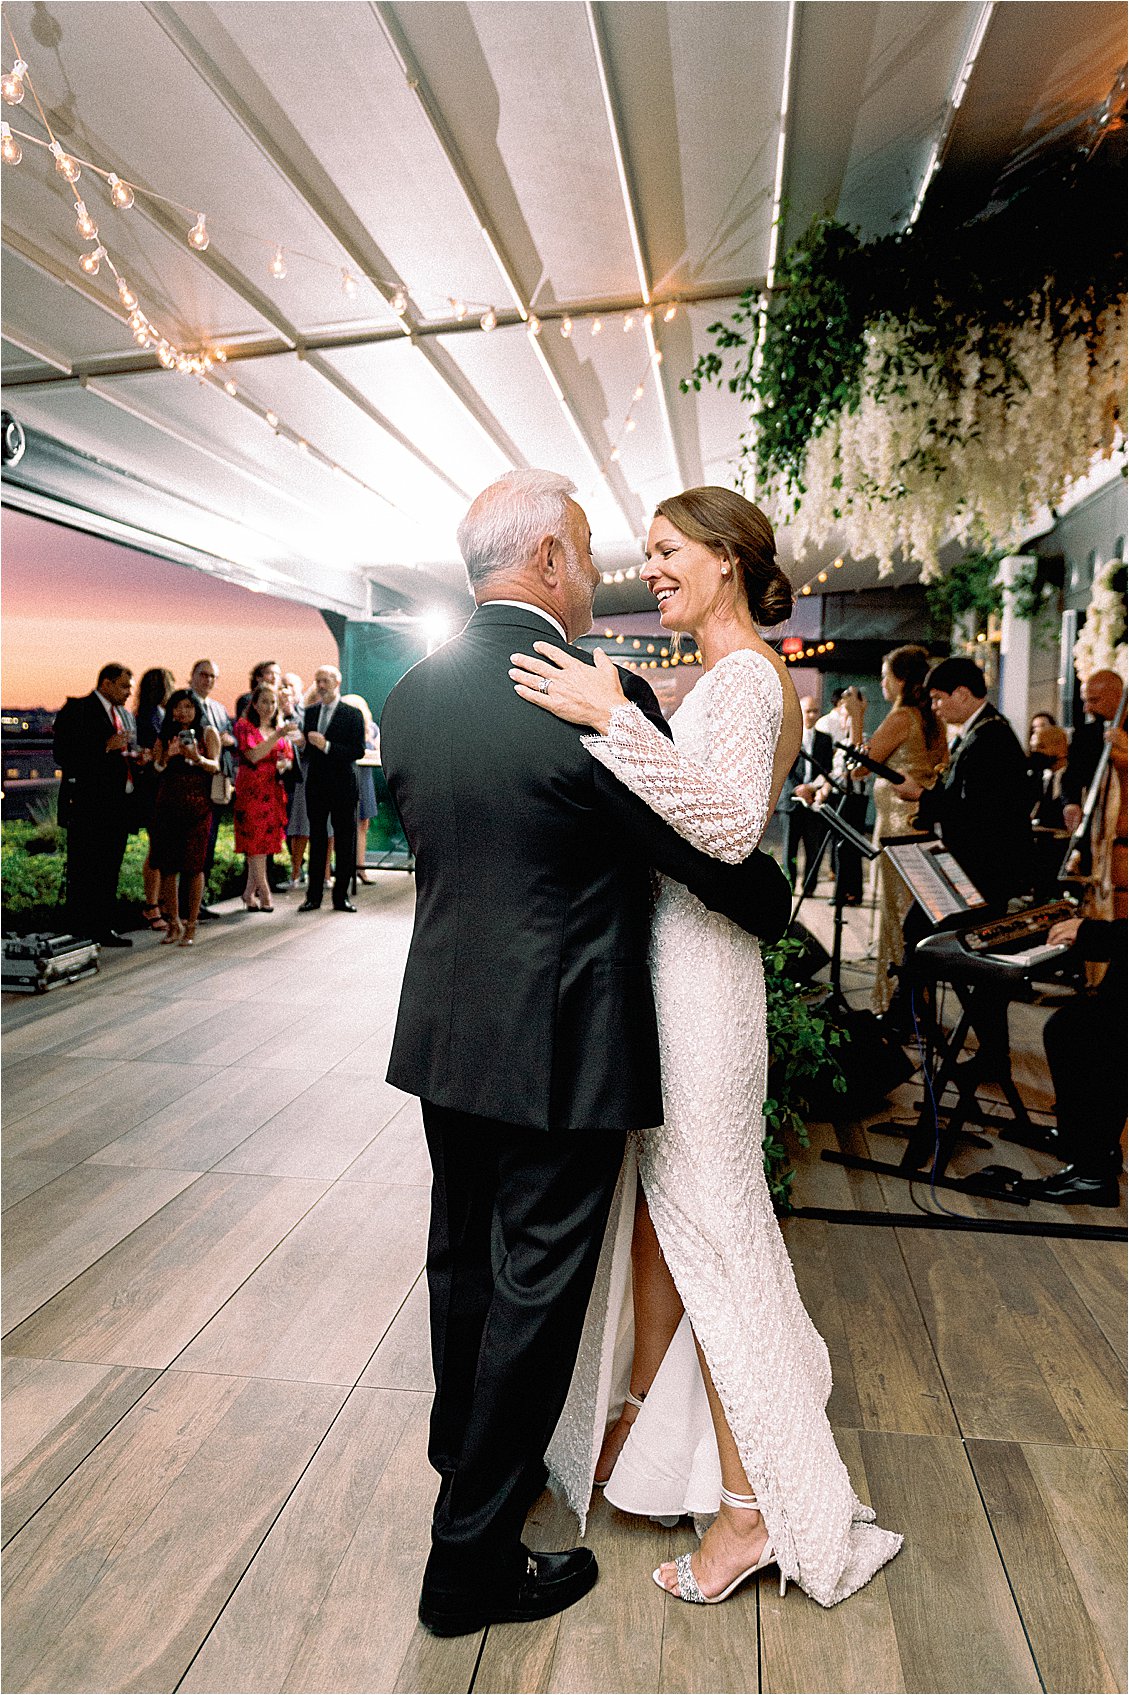 First Dance at Intimate Rooftop Wedding at the Spy Museum in Washington DC